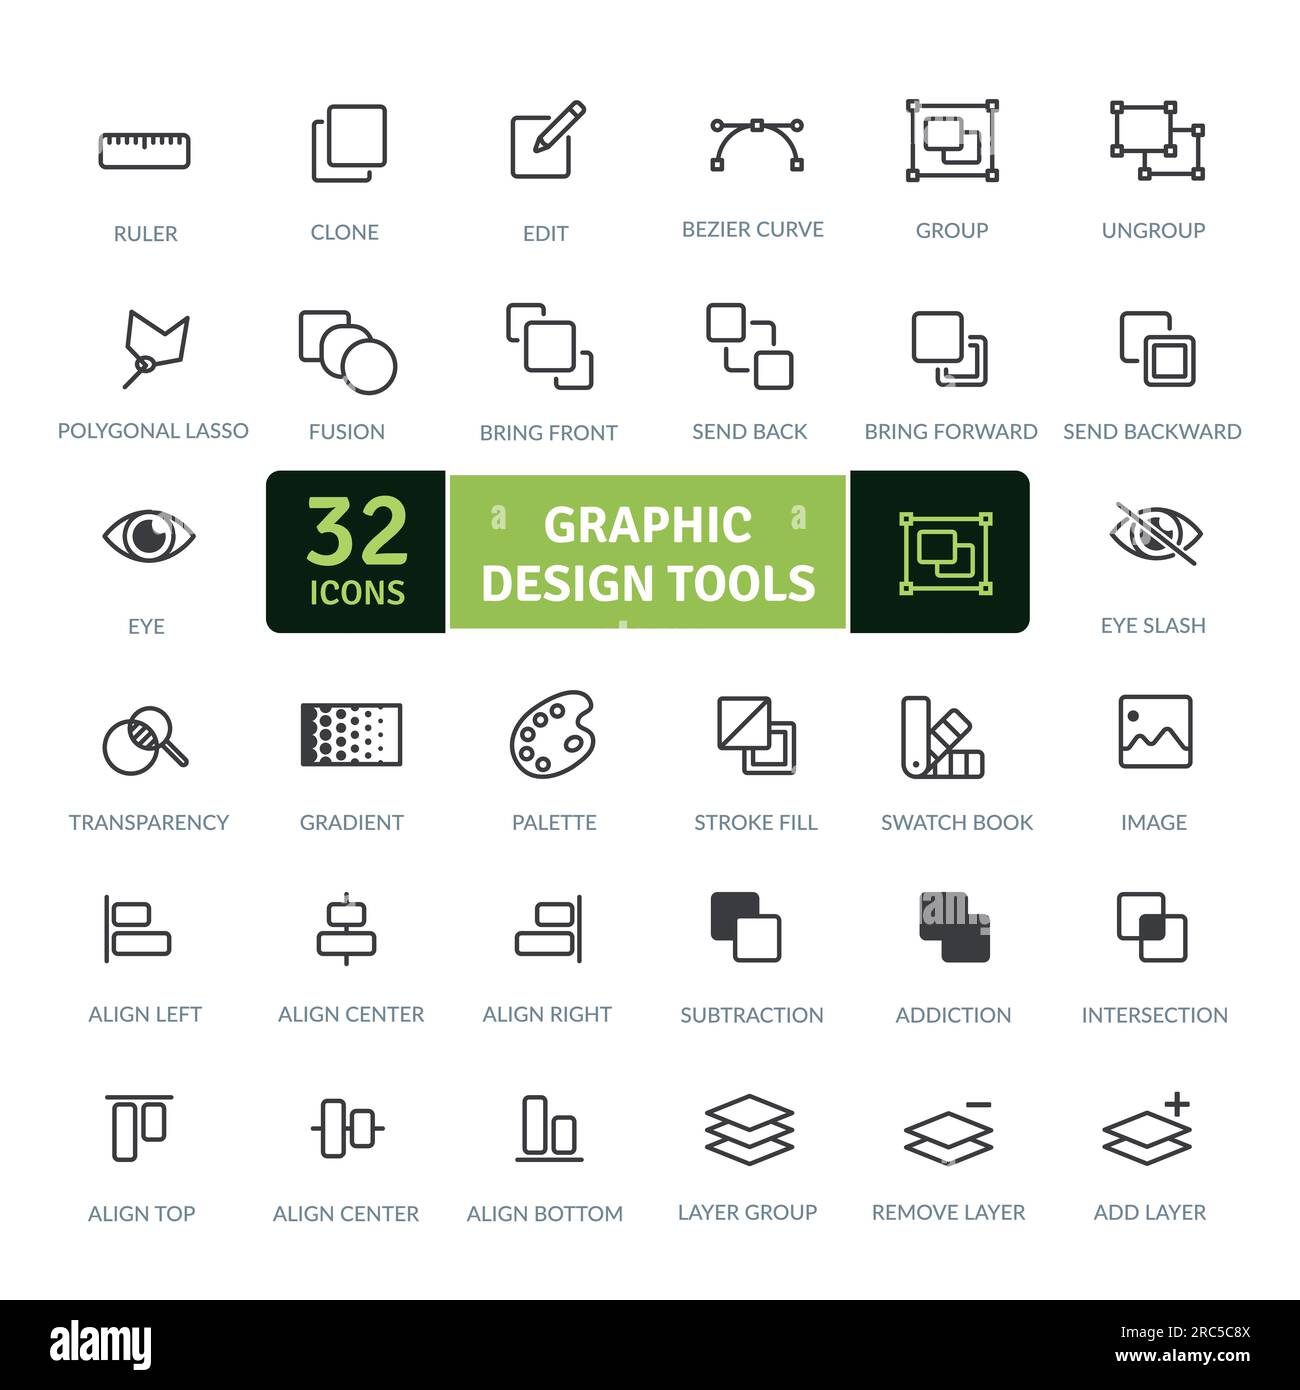 Different drawing tools stock image. Image of graphic - 1251881